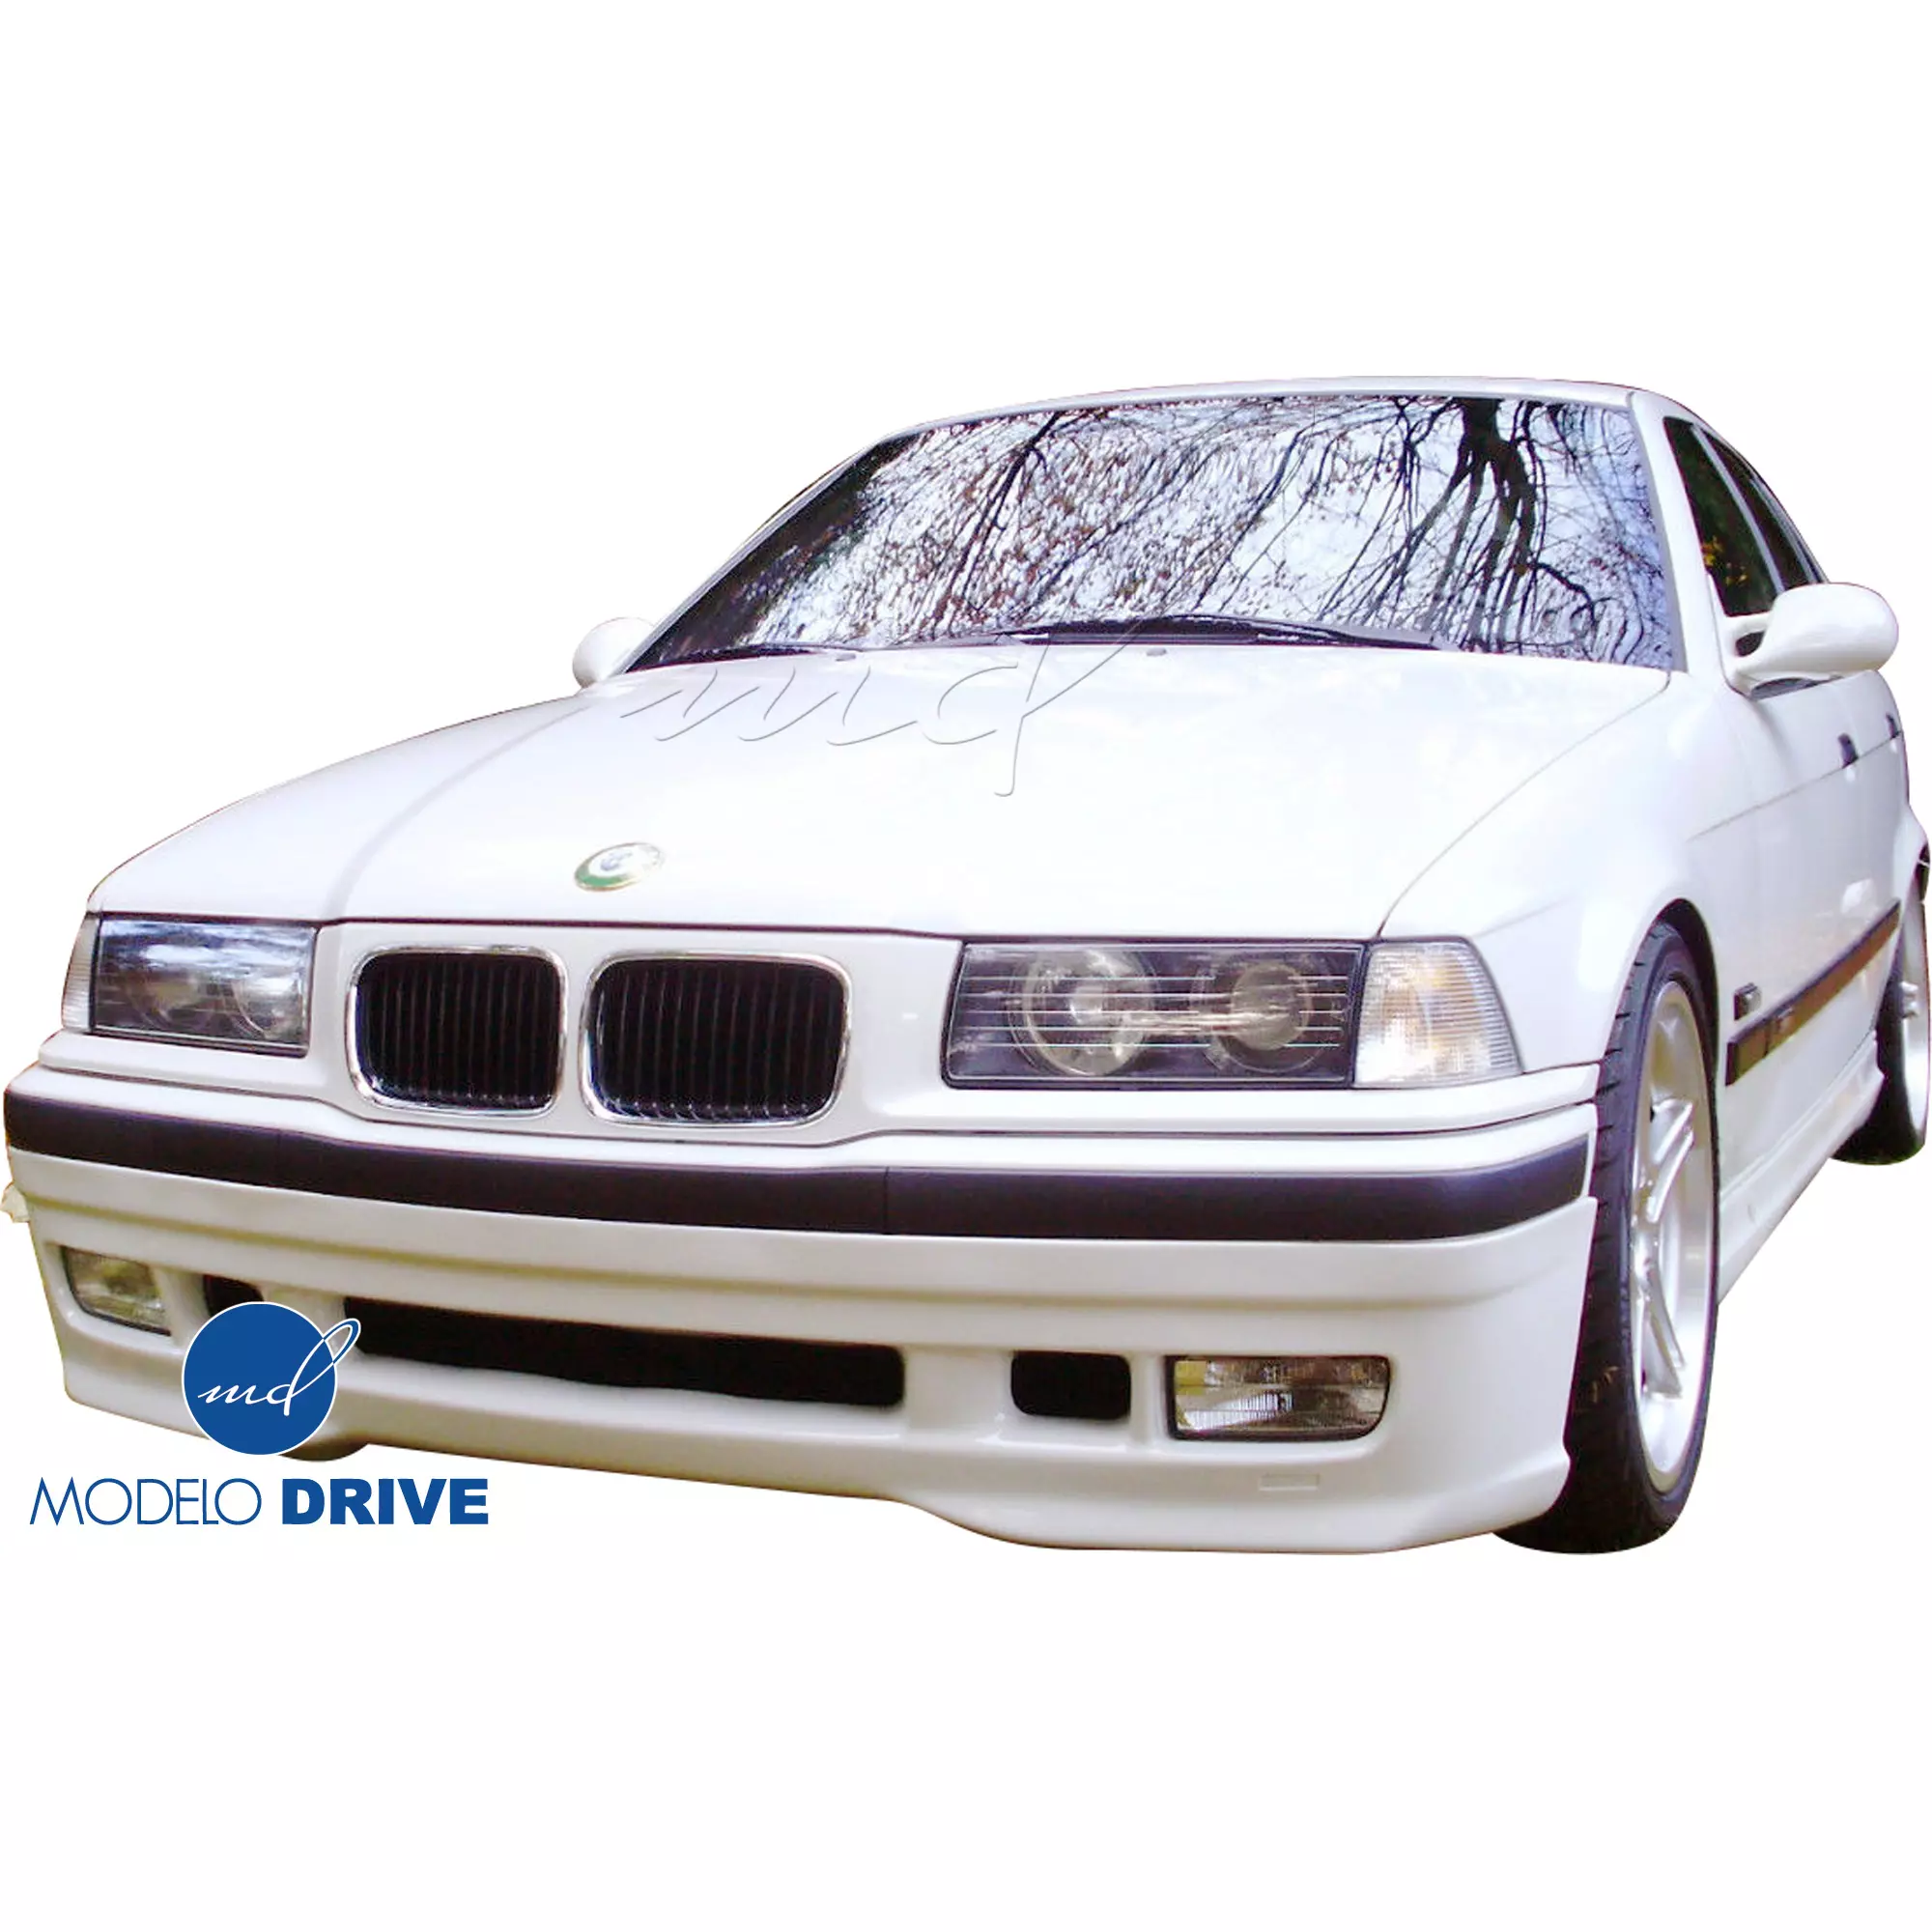 ModeloDrive FRP RDYN Front Valance Add-on > BMW 3-Series E36 1992-1998 > 2/4dr - Image 1